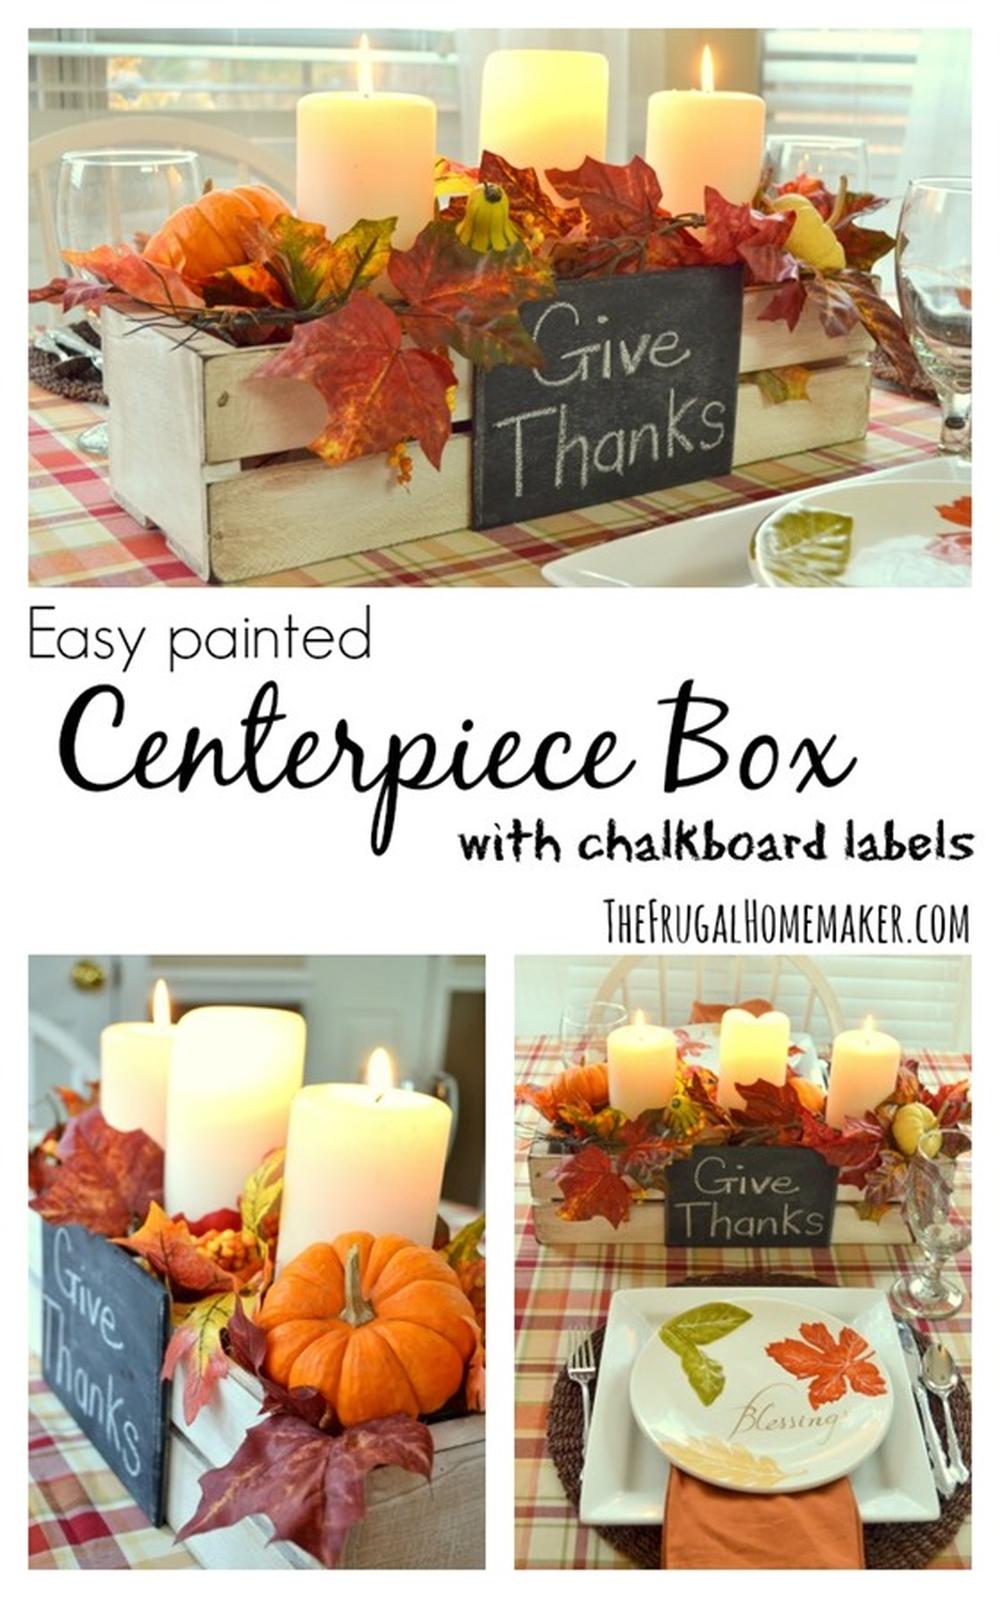 Centerpiece box with chalkboard labels thanksgiving table decor ideas